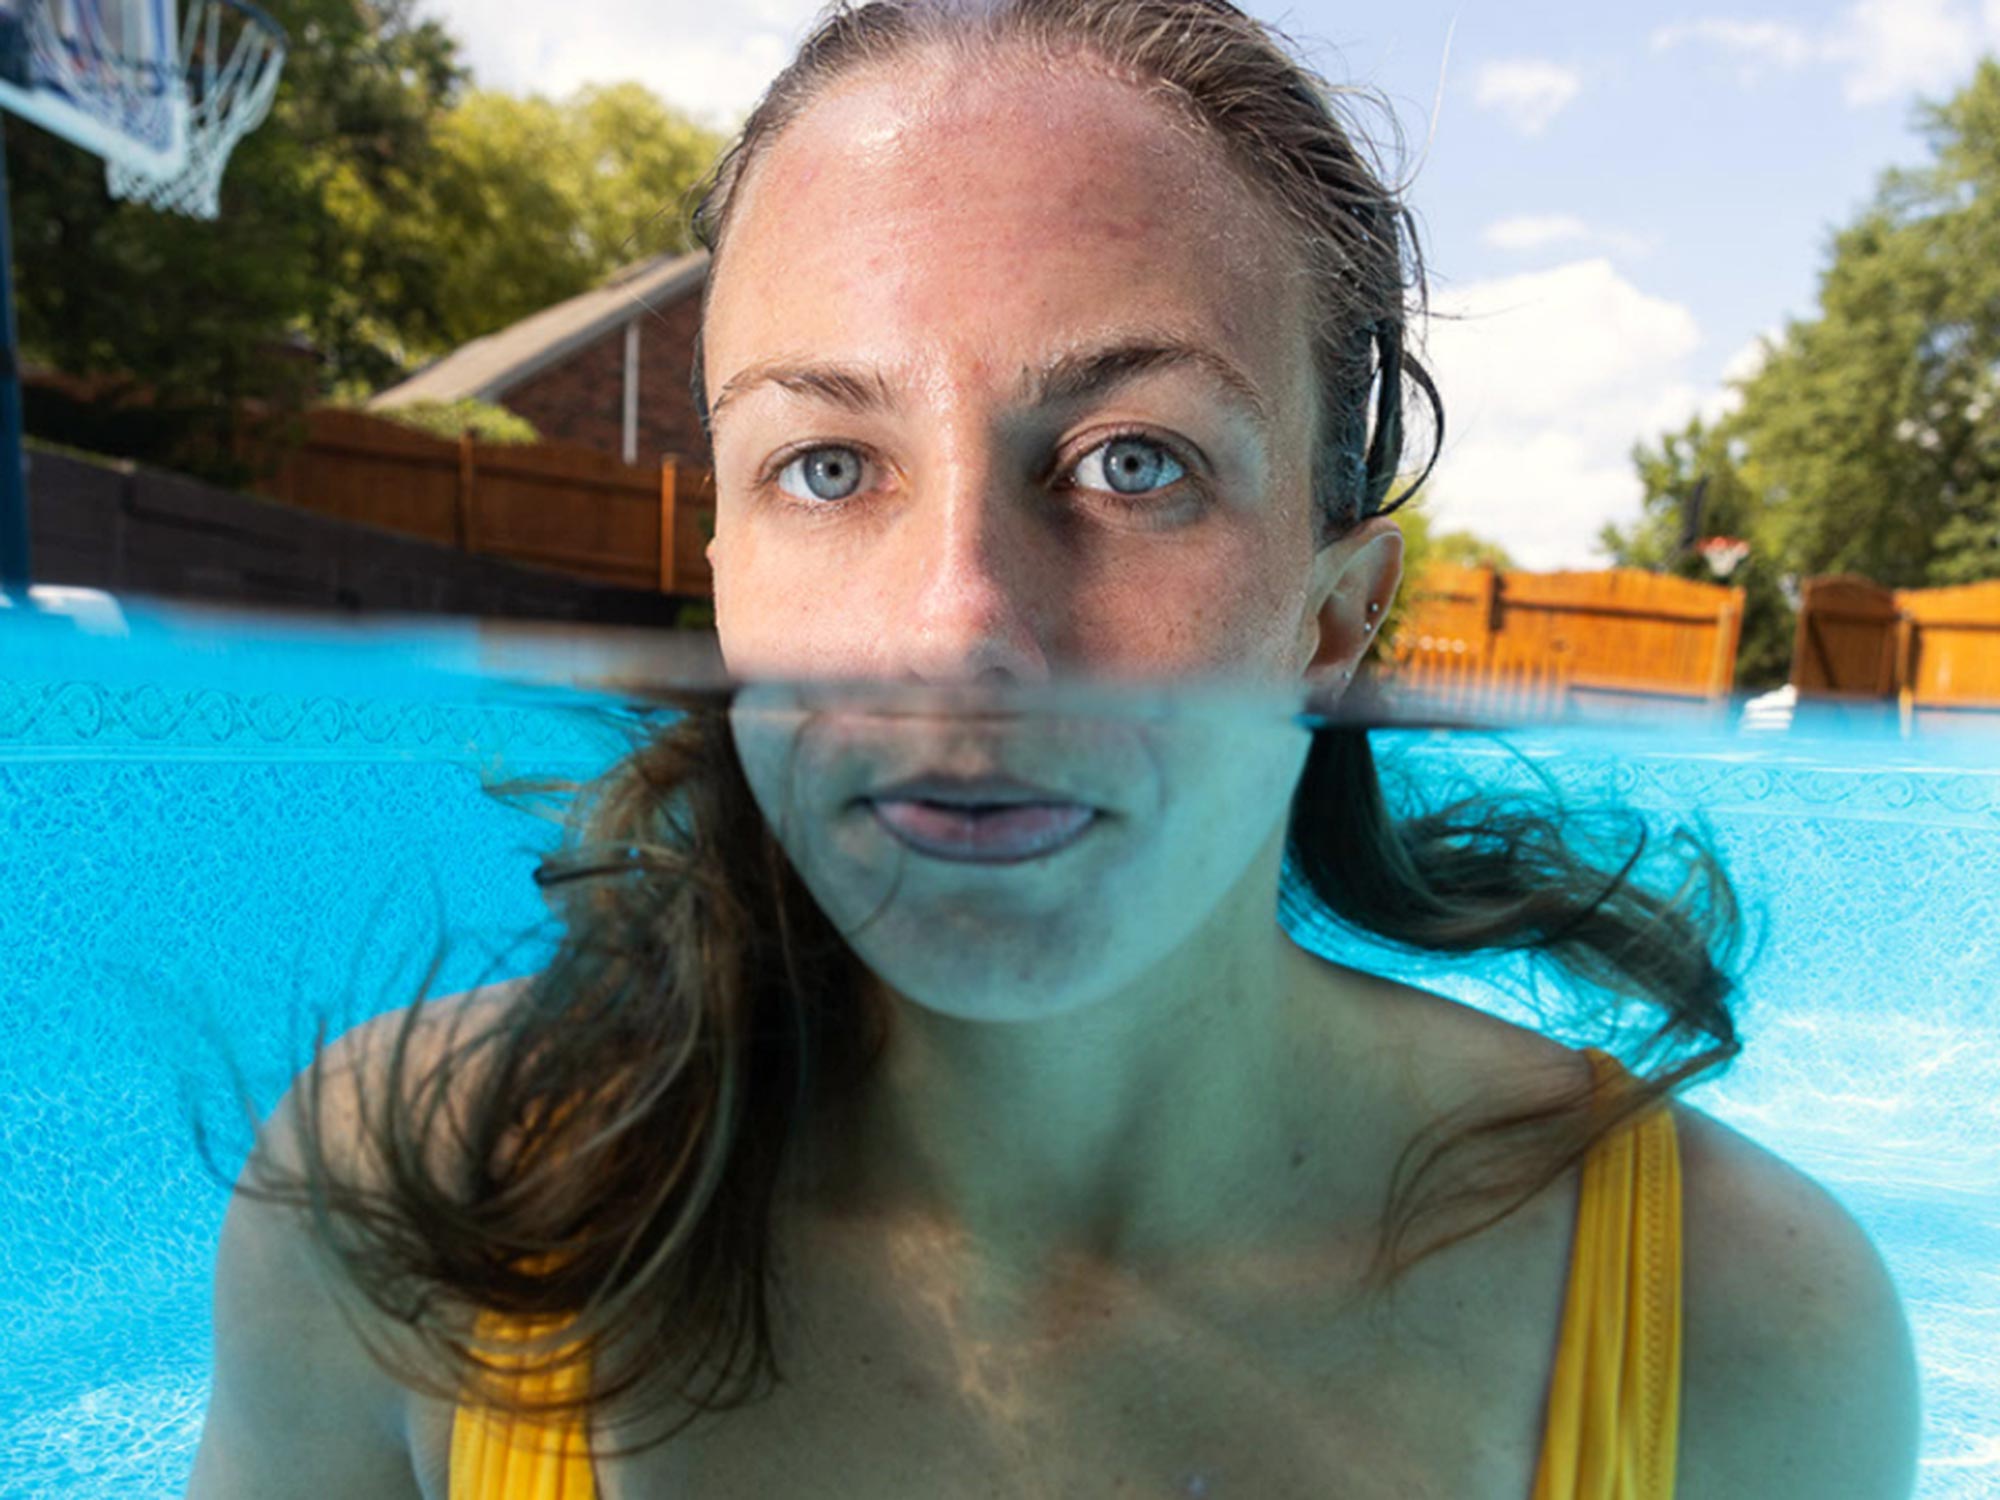 I Tried an Underwater Pool Photoshoot for the First Time [VIDEO]